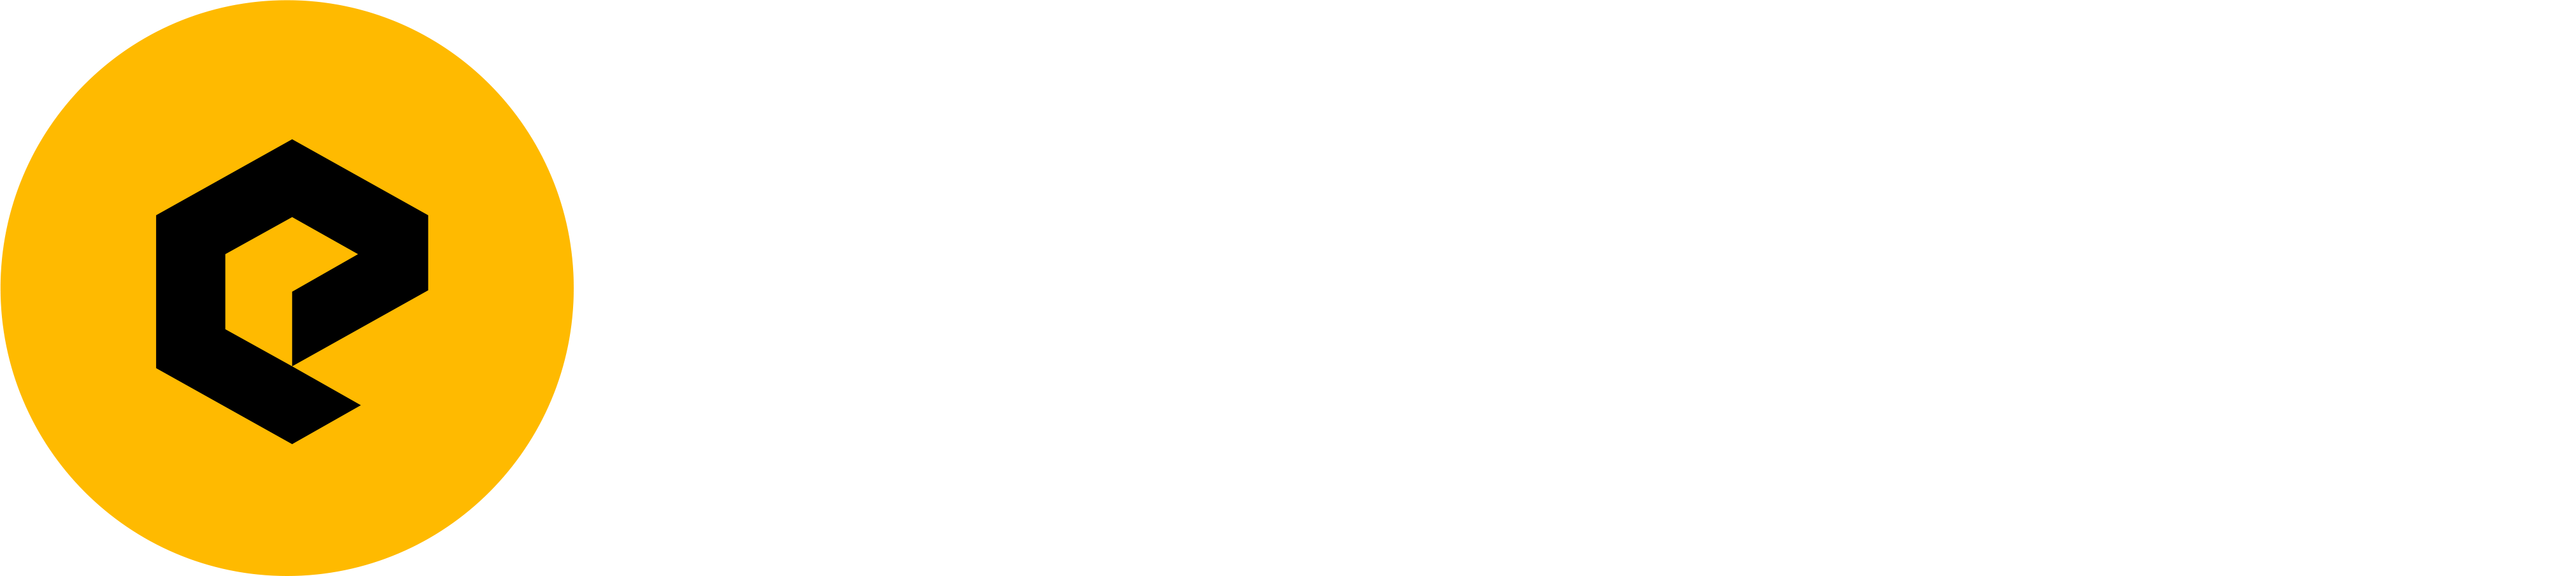 Powered Now Logo with Text White